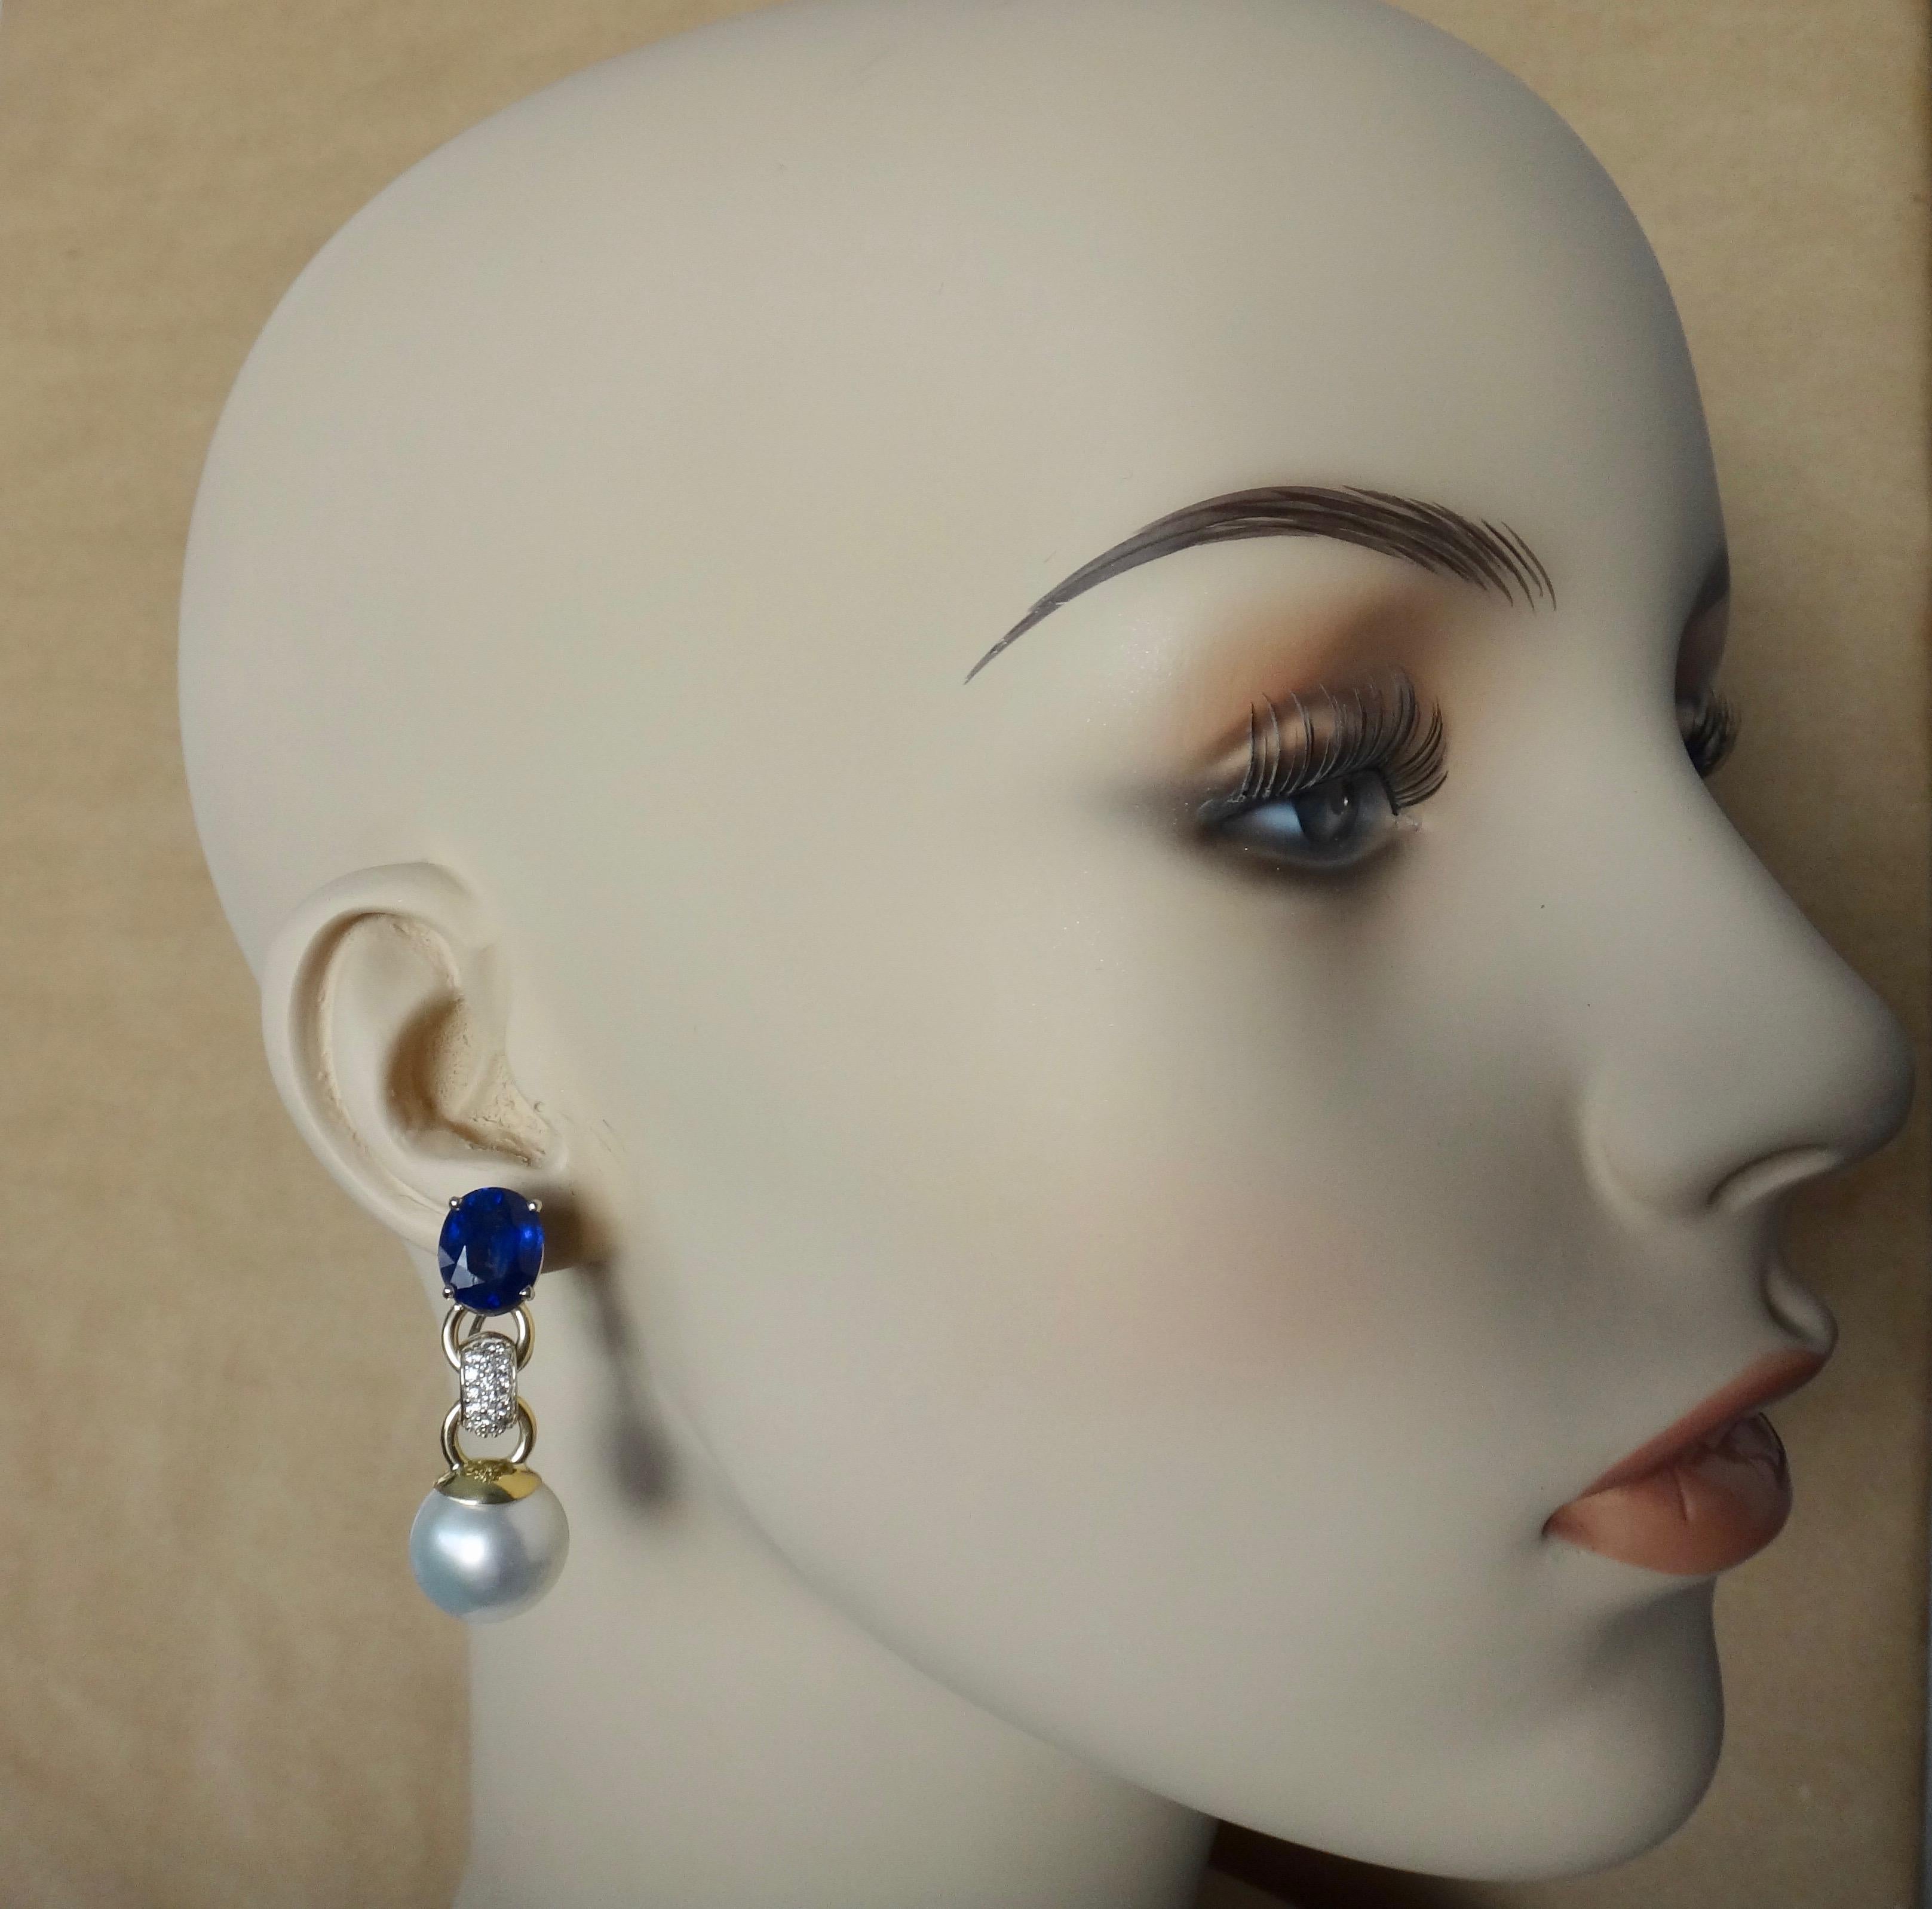 Blue sapphires (origin: Thailand) are paired with slightly baroque, gem quality Paspaley South Seas pearls in these classic dangle earrings.  The sapphires are royal blue in color, well cut and polished.   Tying the two design elements together are